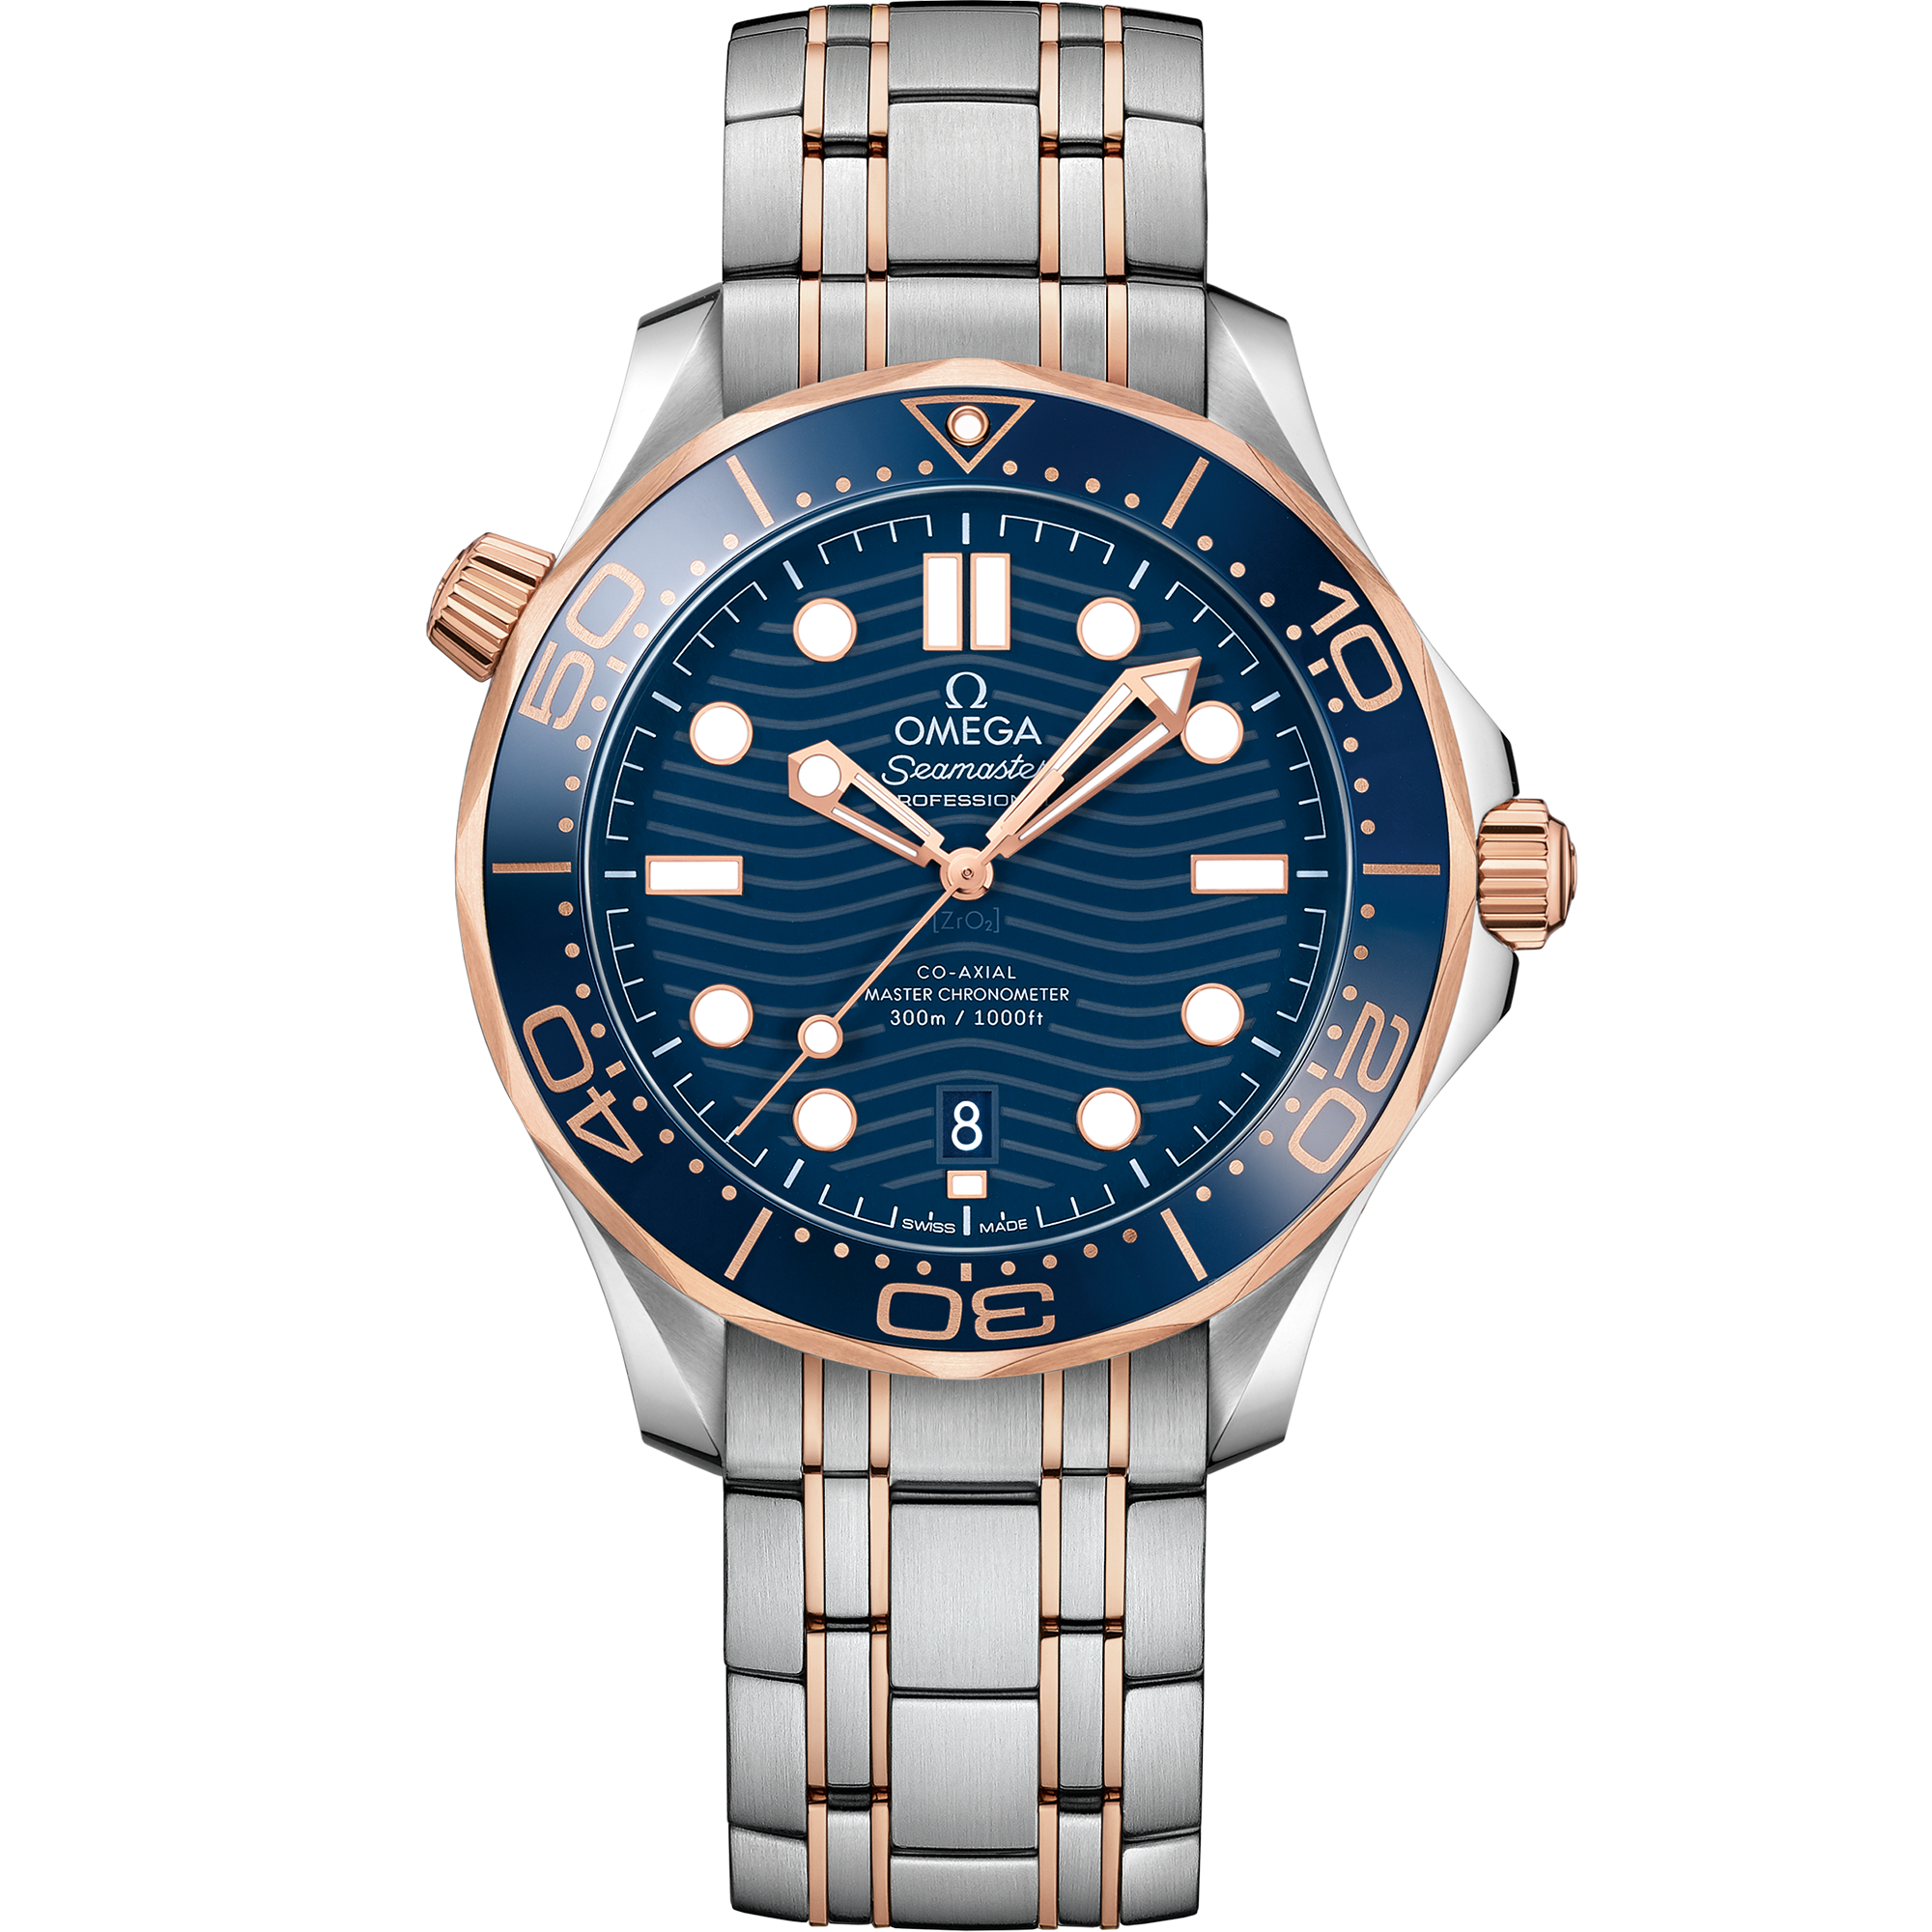 Diver 300M Watches - Seamaster | OMEGA®